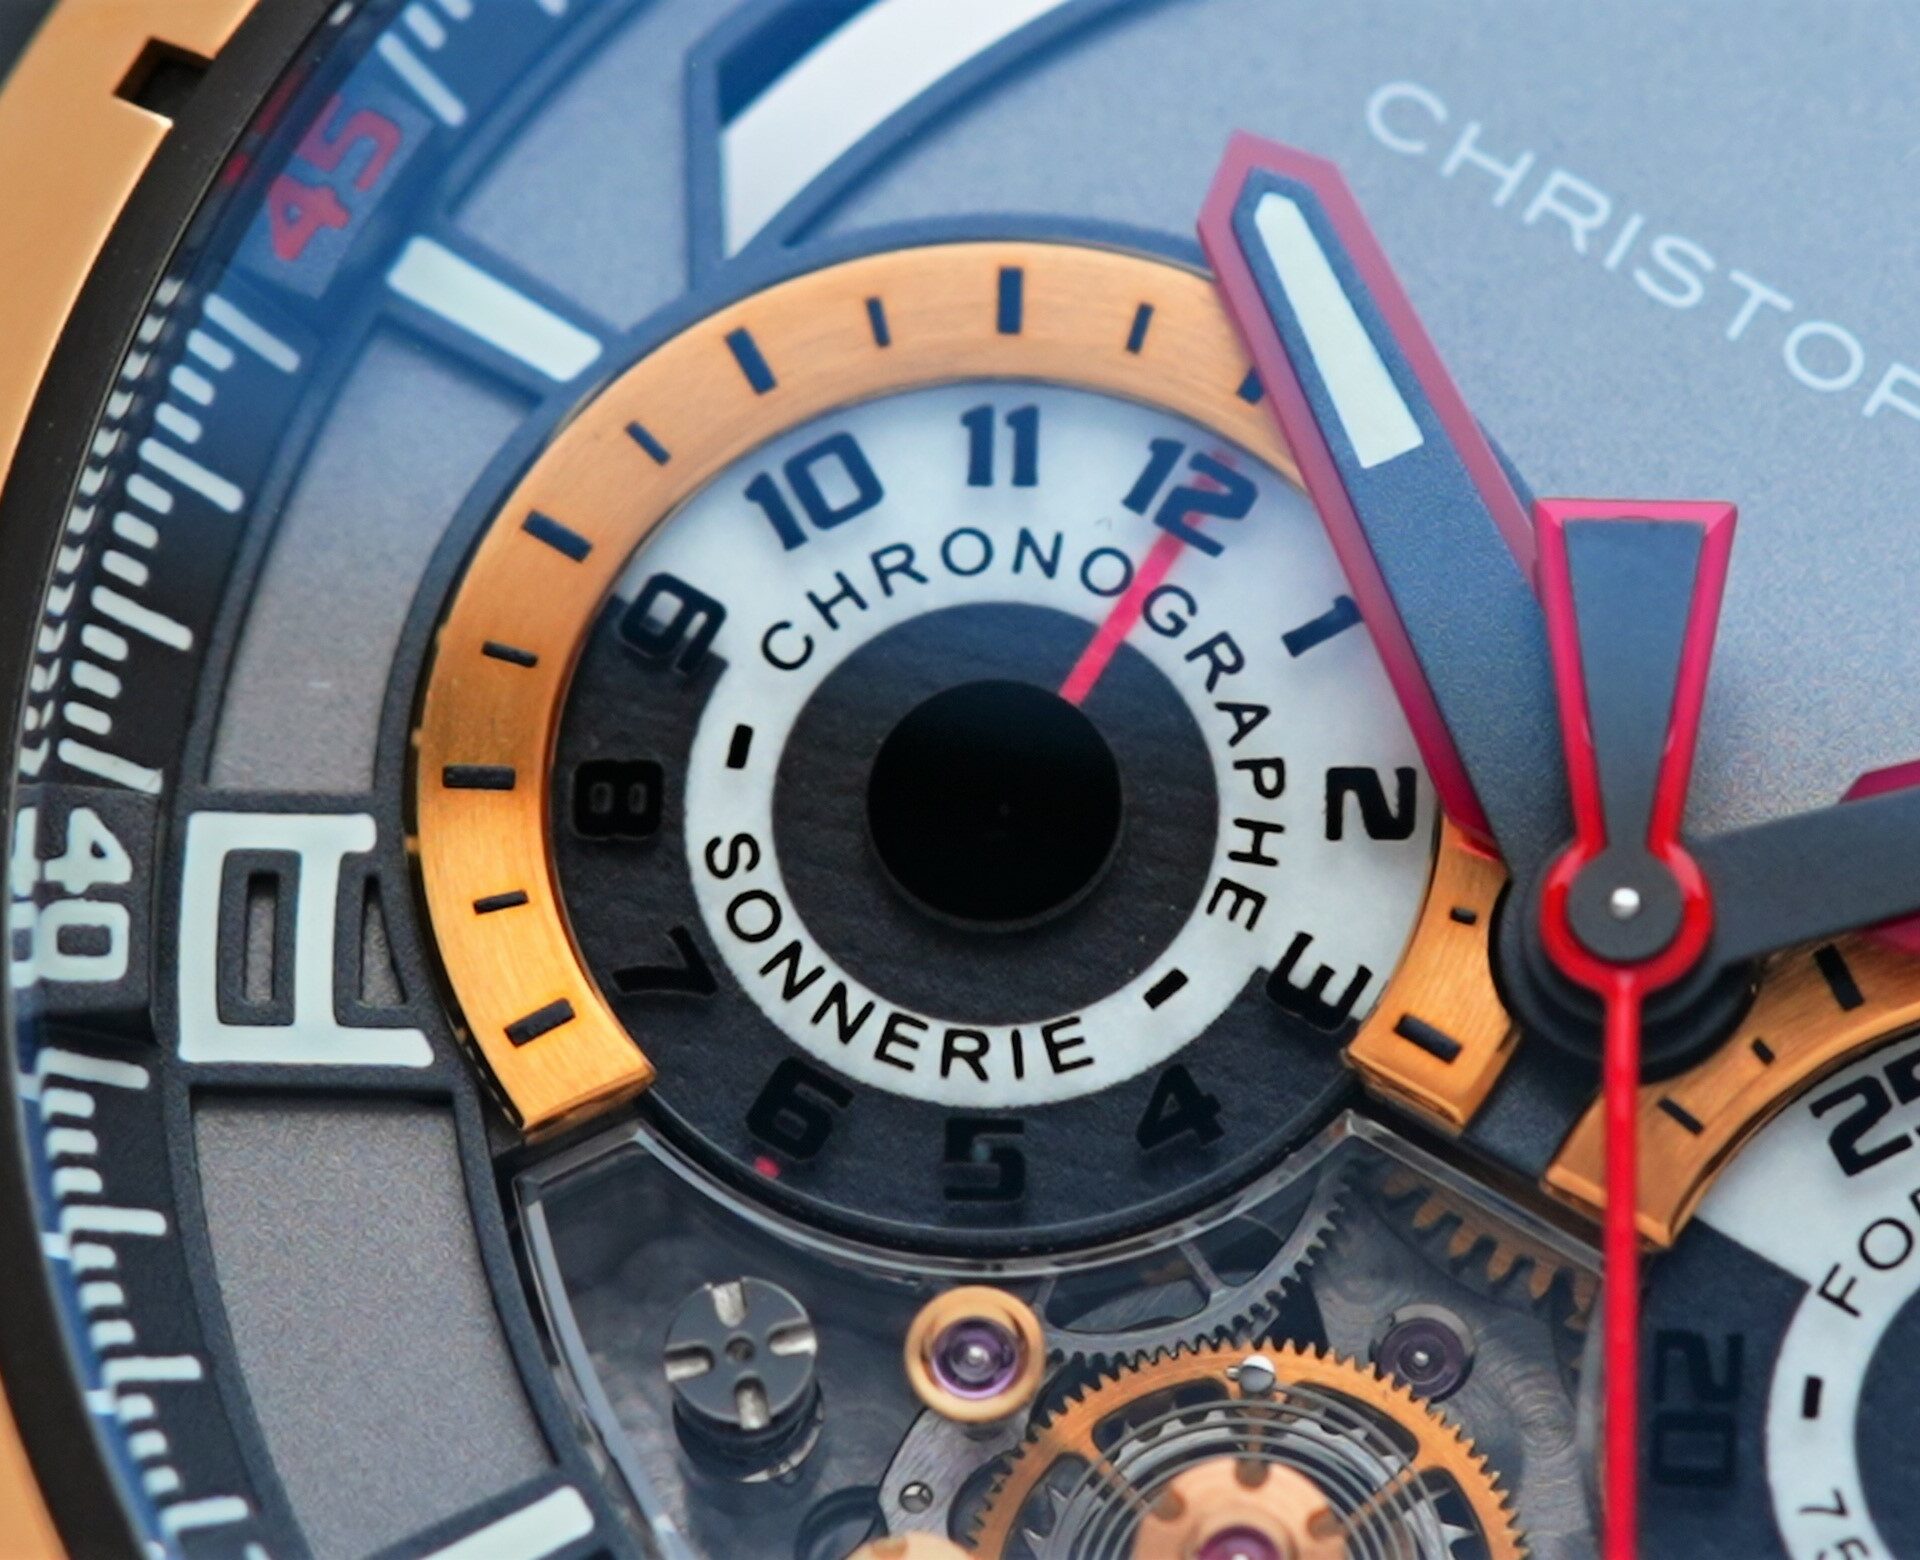 Christophe Claret Kantharos Chime Sonnerie Monopusher Chronograph close up shot of dial.